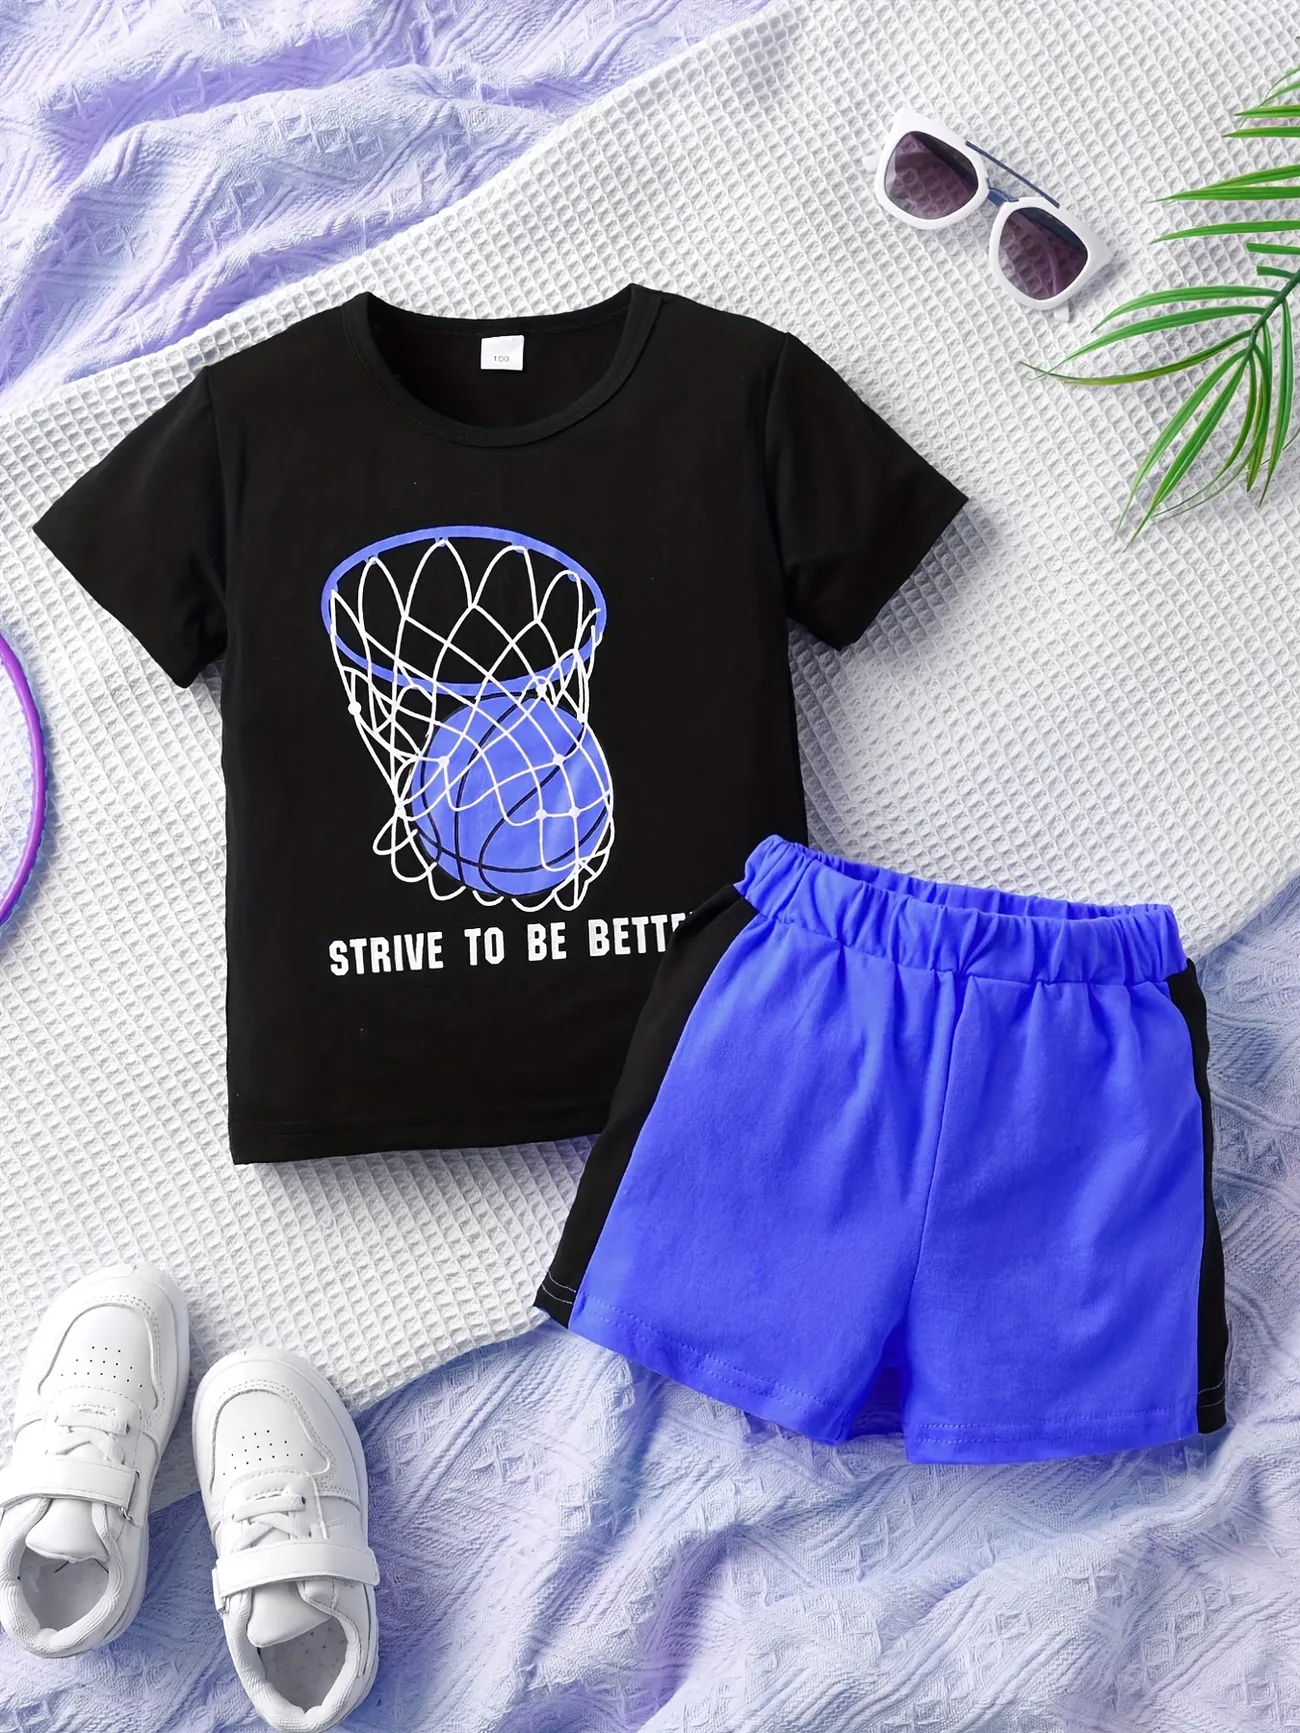 Boys Basketball Graphic Outfit Short Sleeves Round Neck T-shirt